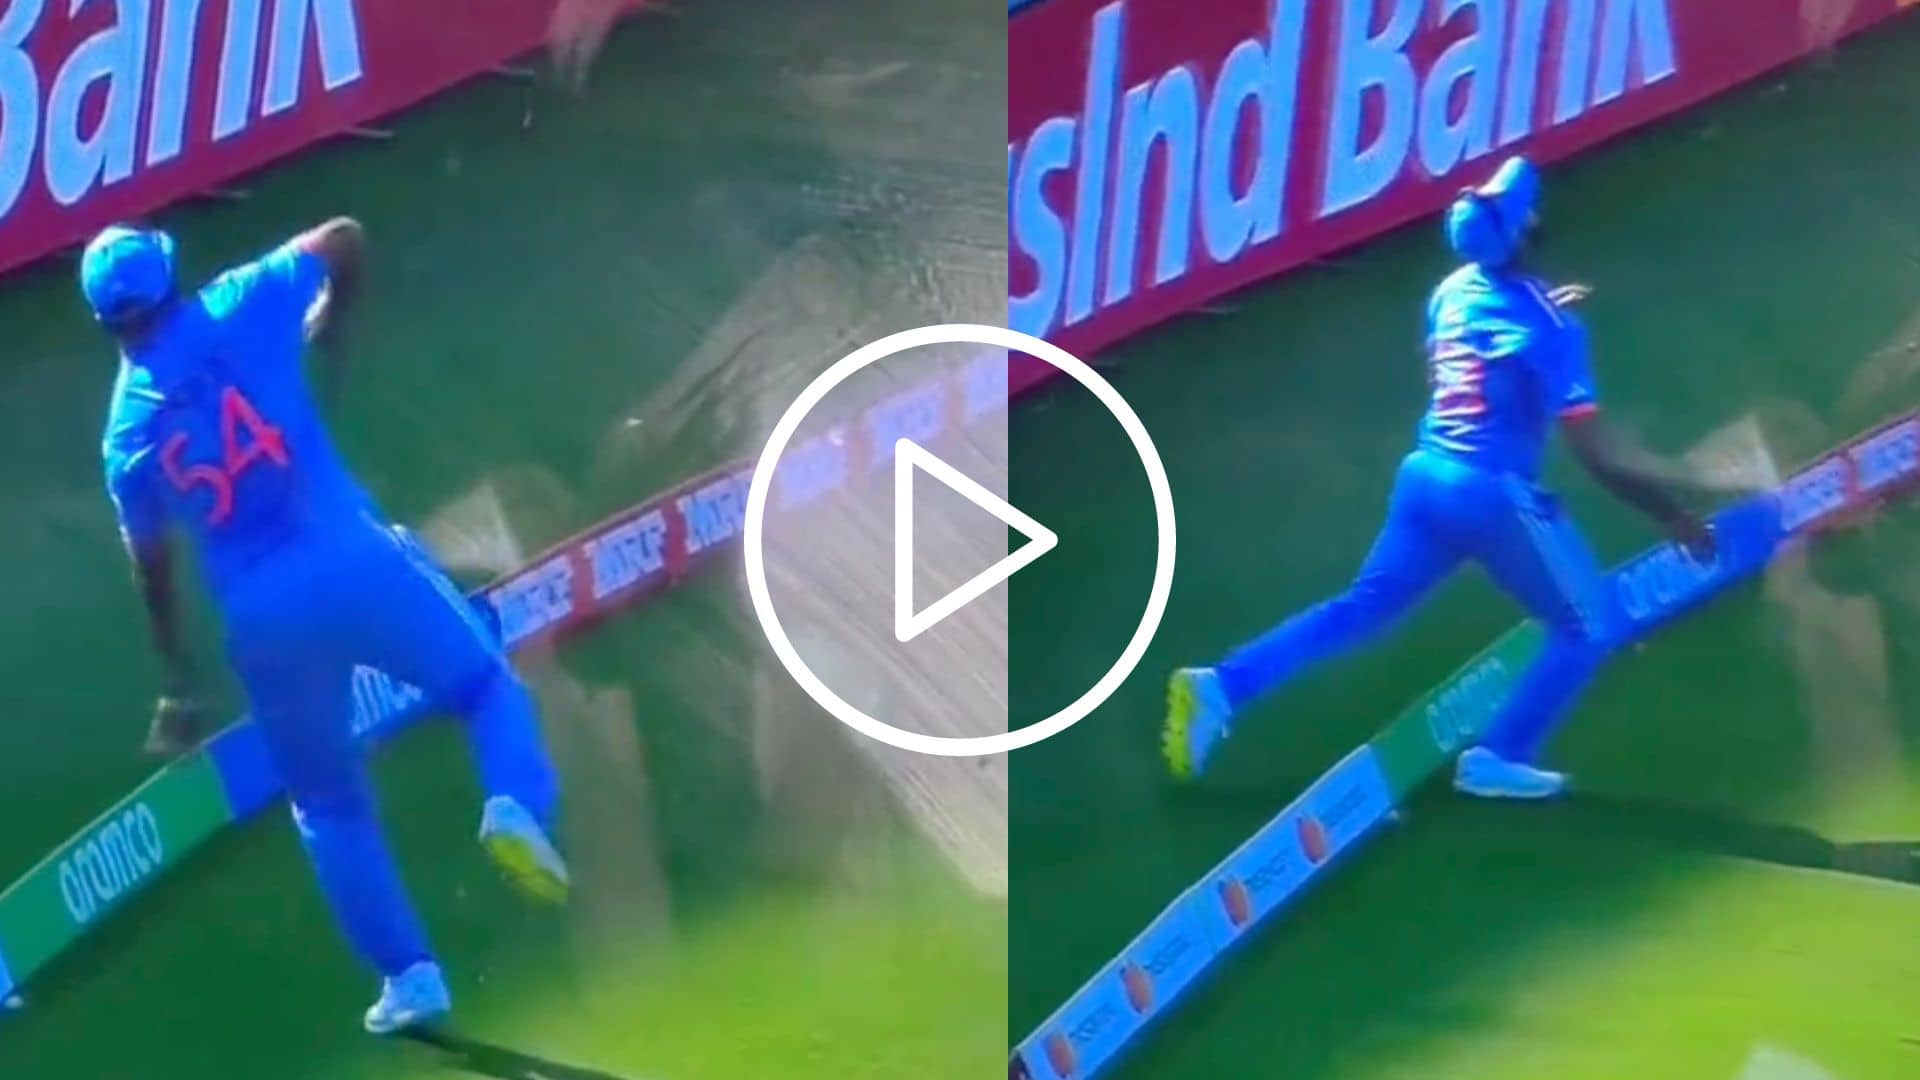 [Watch] Shardul Thakur Assists Hardik Pandya With ‘Outrageous’ Catch Down The Rope